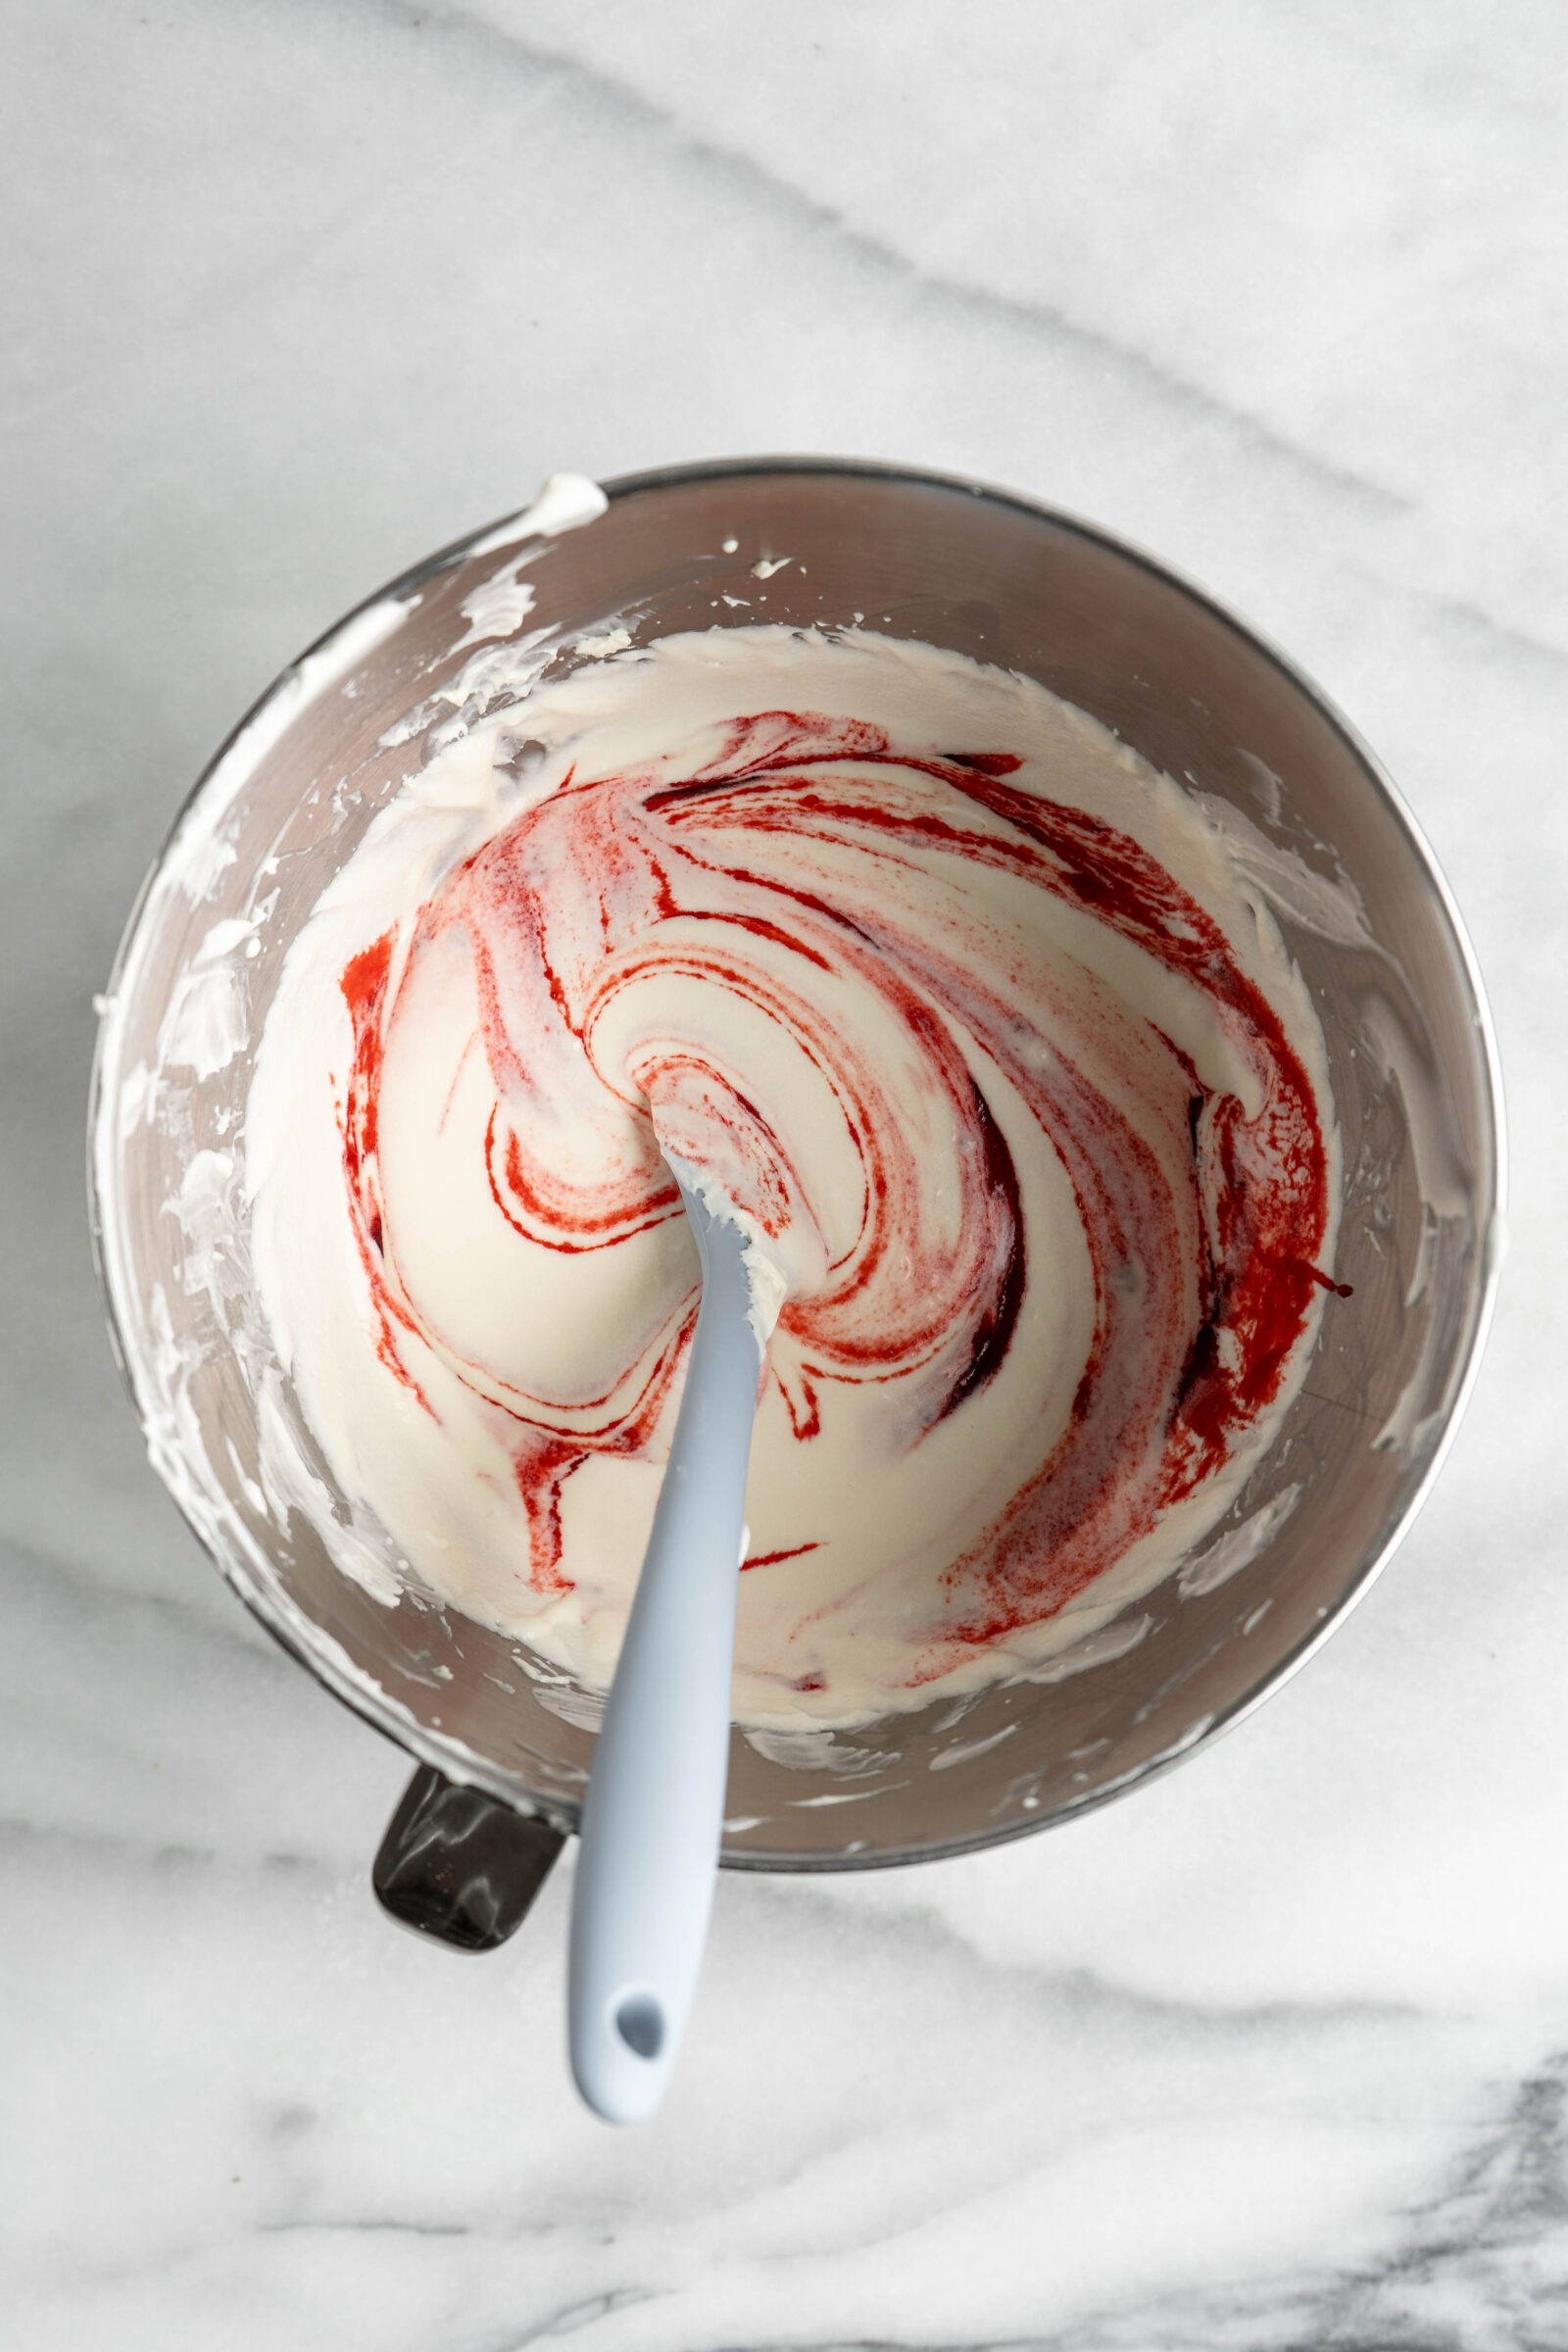 Strawberry jam added to no bake cheesecake filling.